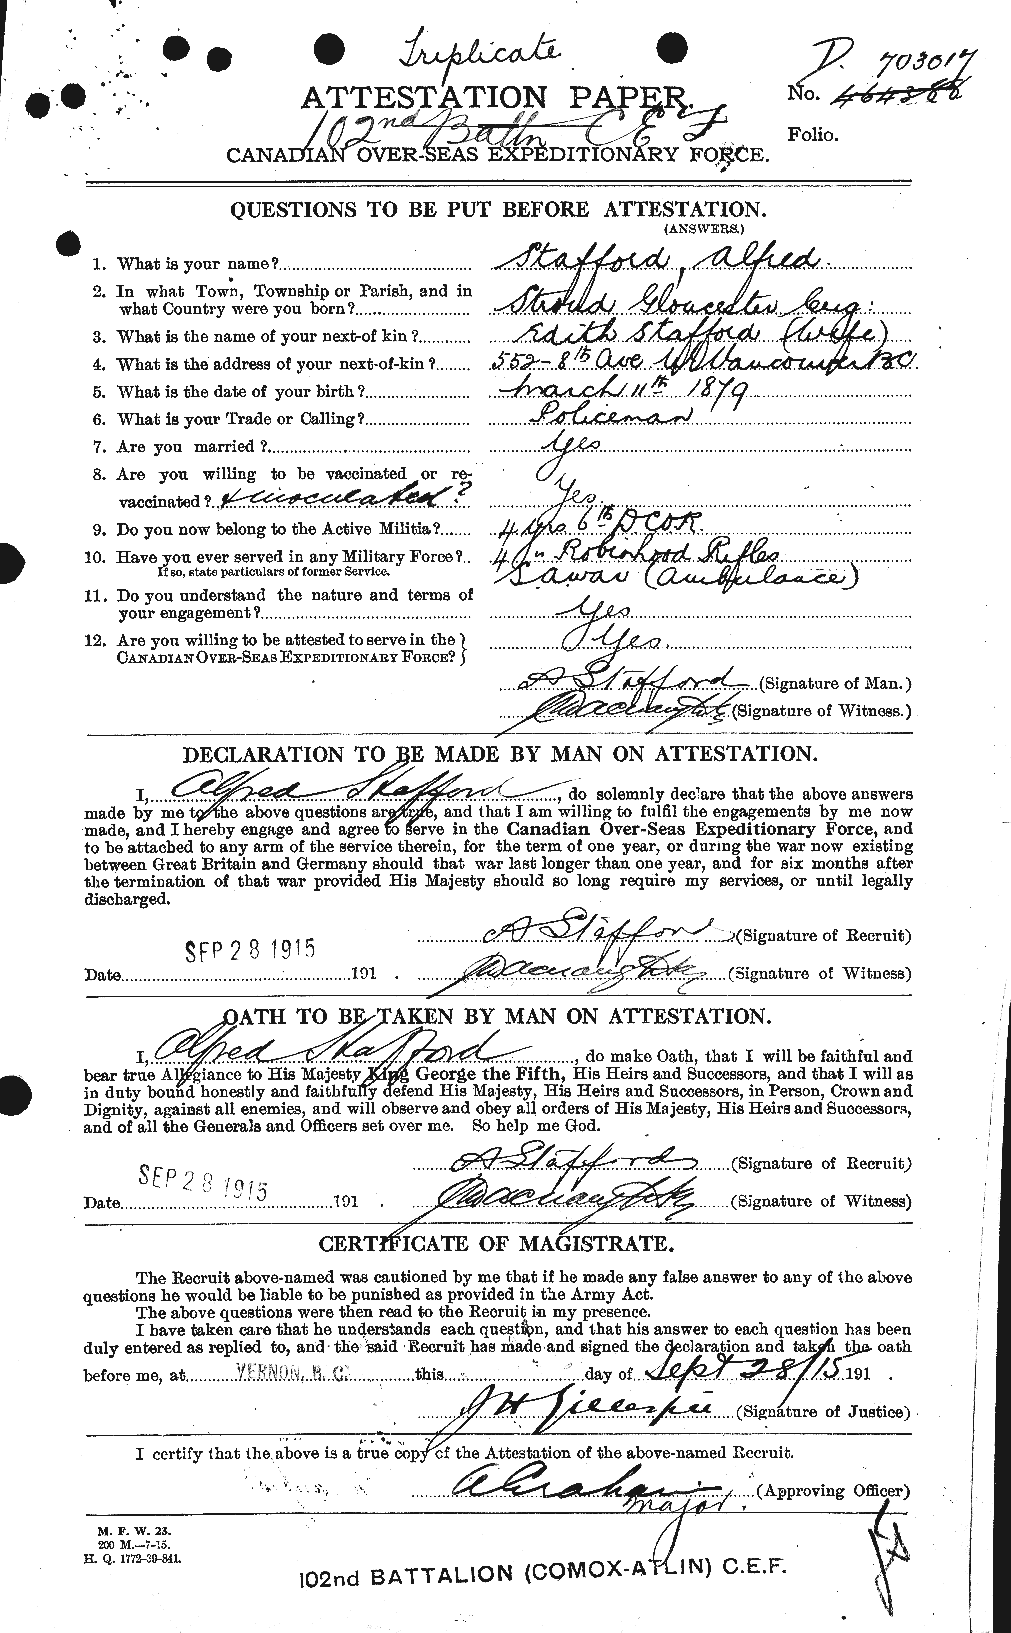 Personnel Records of the First World War - CEF 113432a